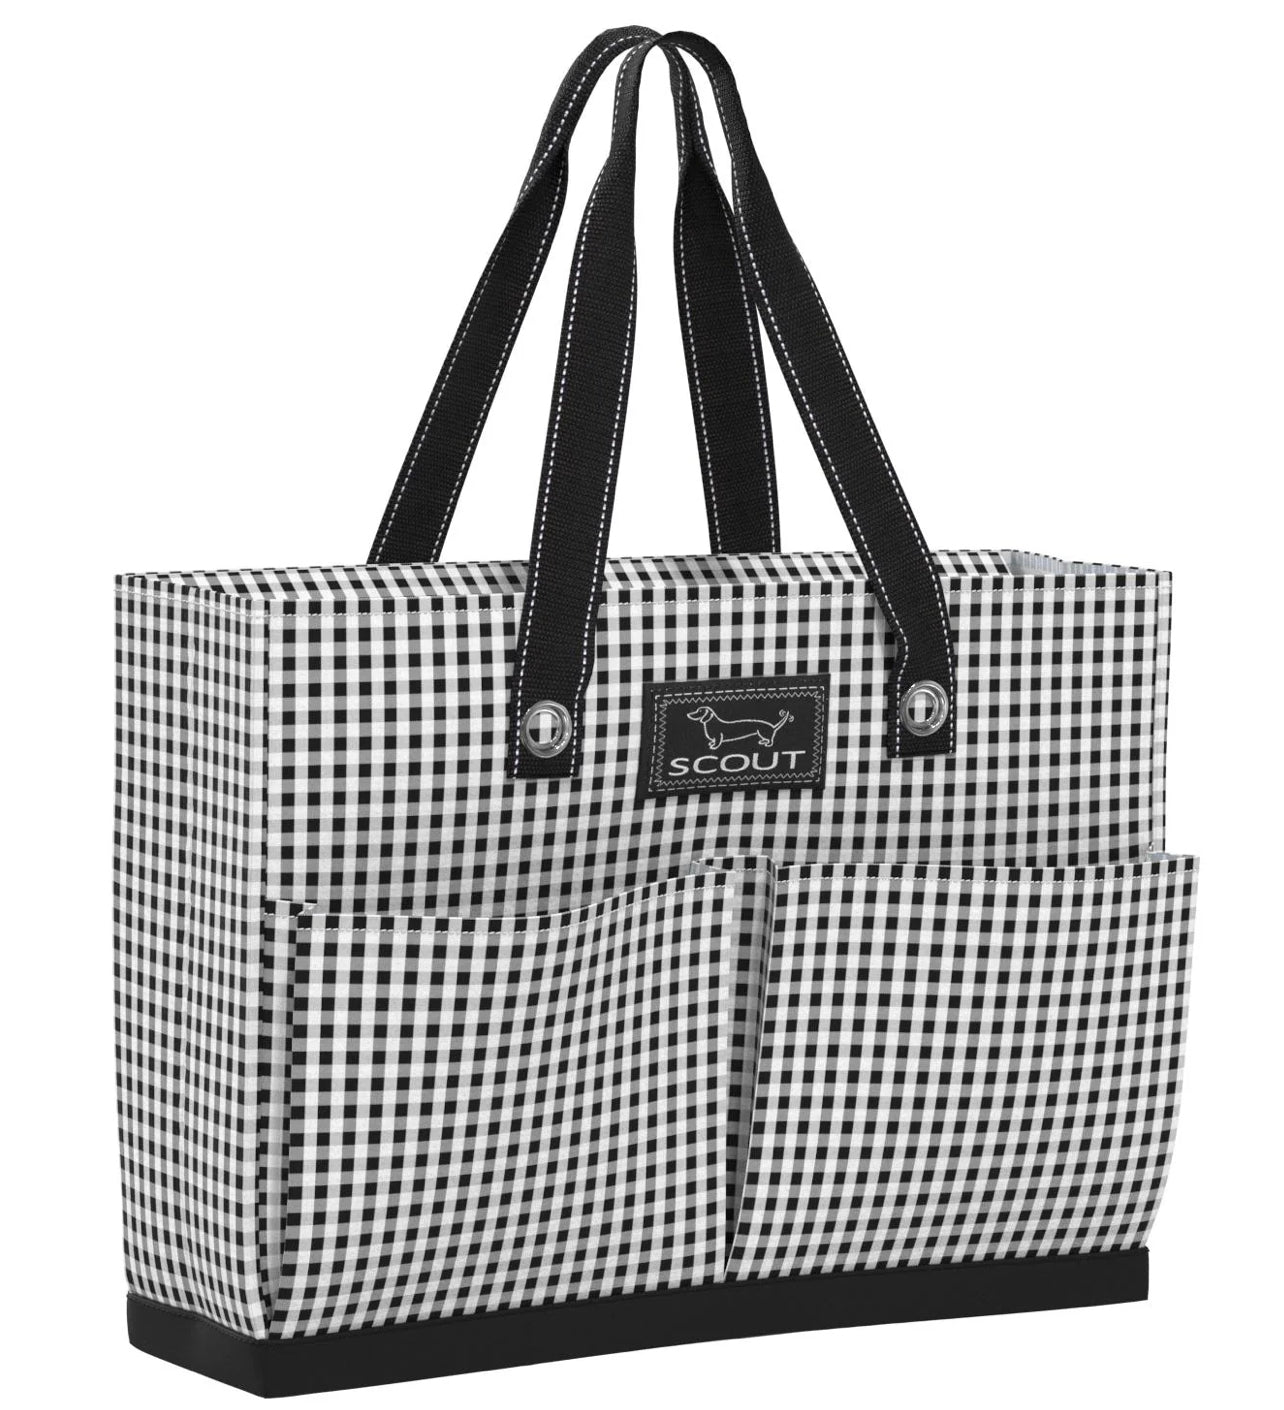 Uptown Girl (tote) by Scout Bags